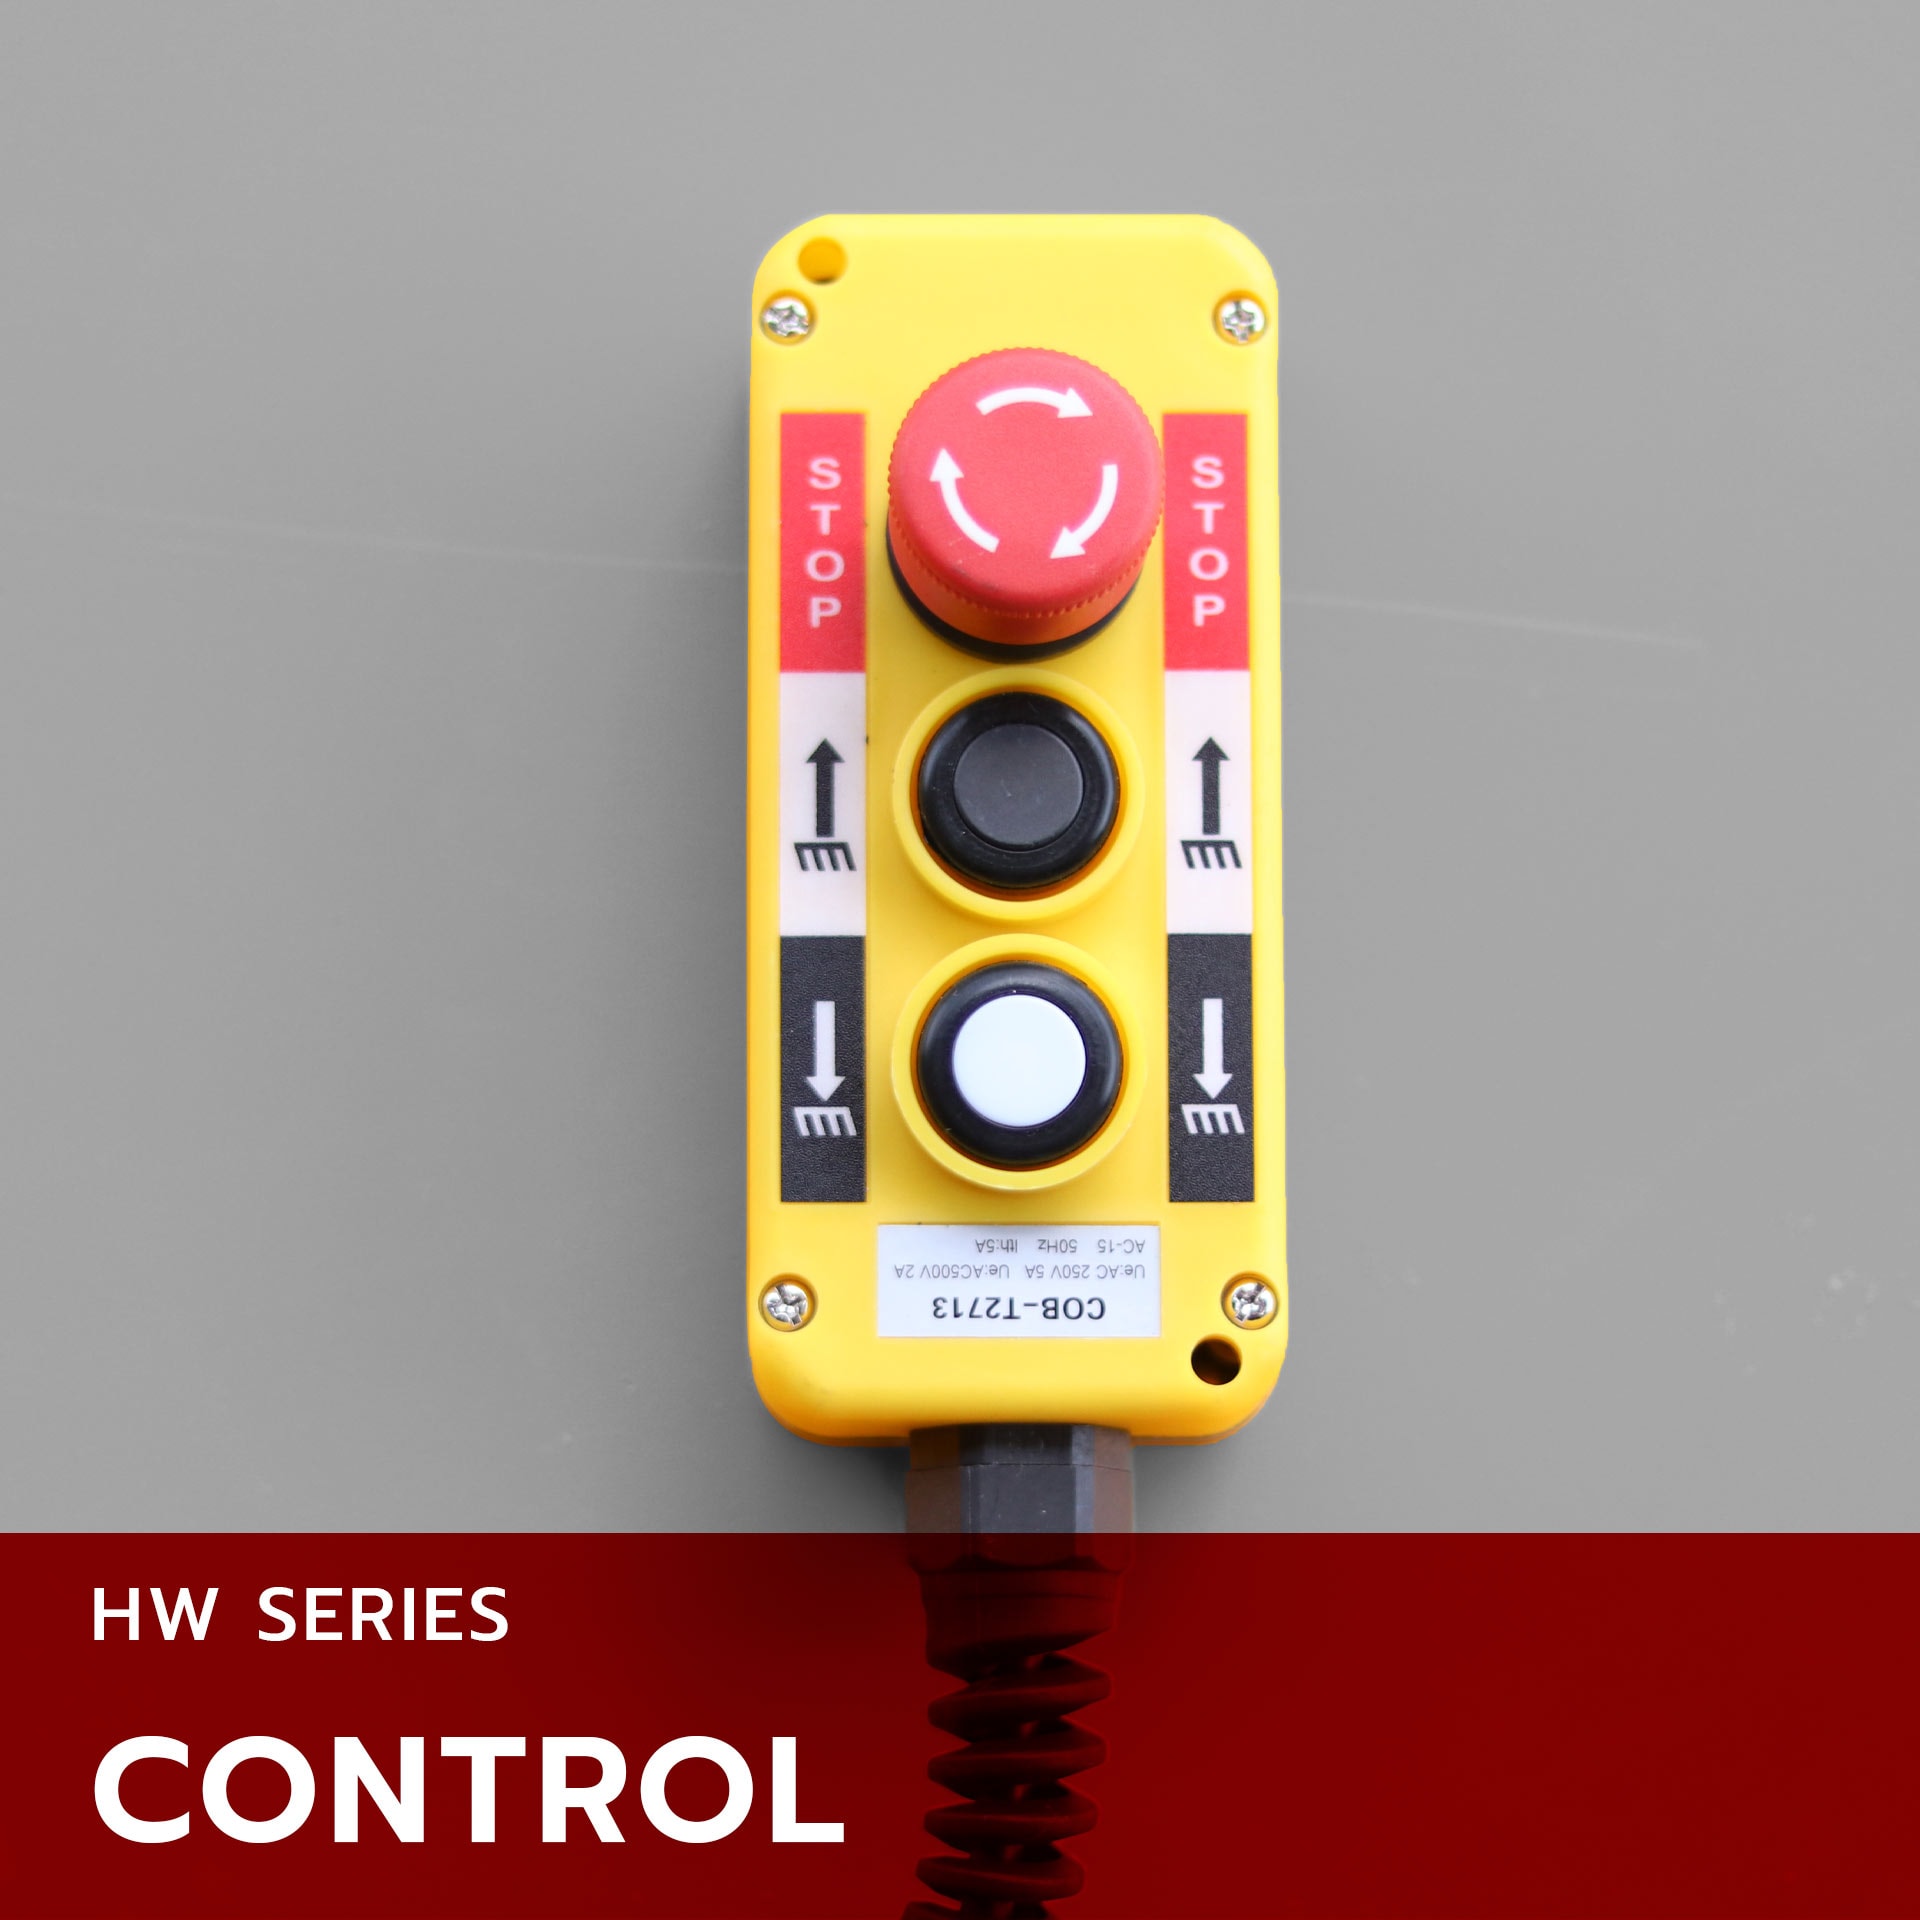 Remote control x lift table hw-400 series